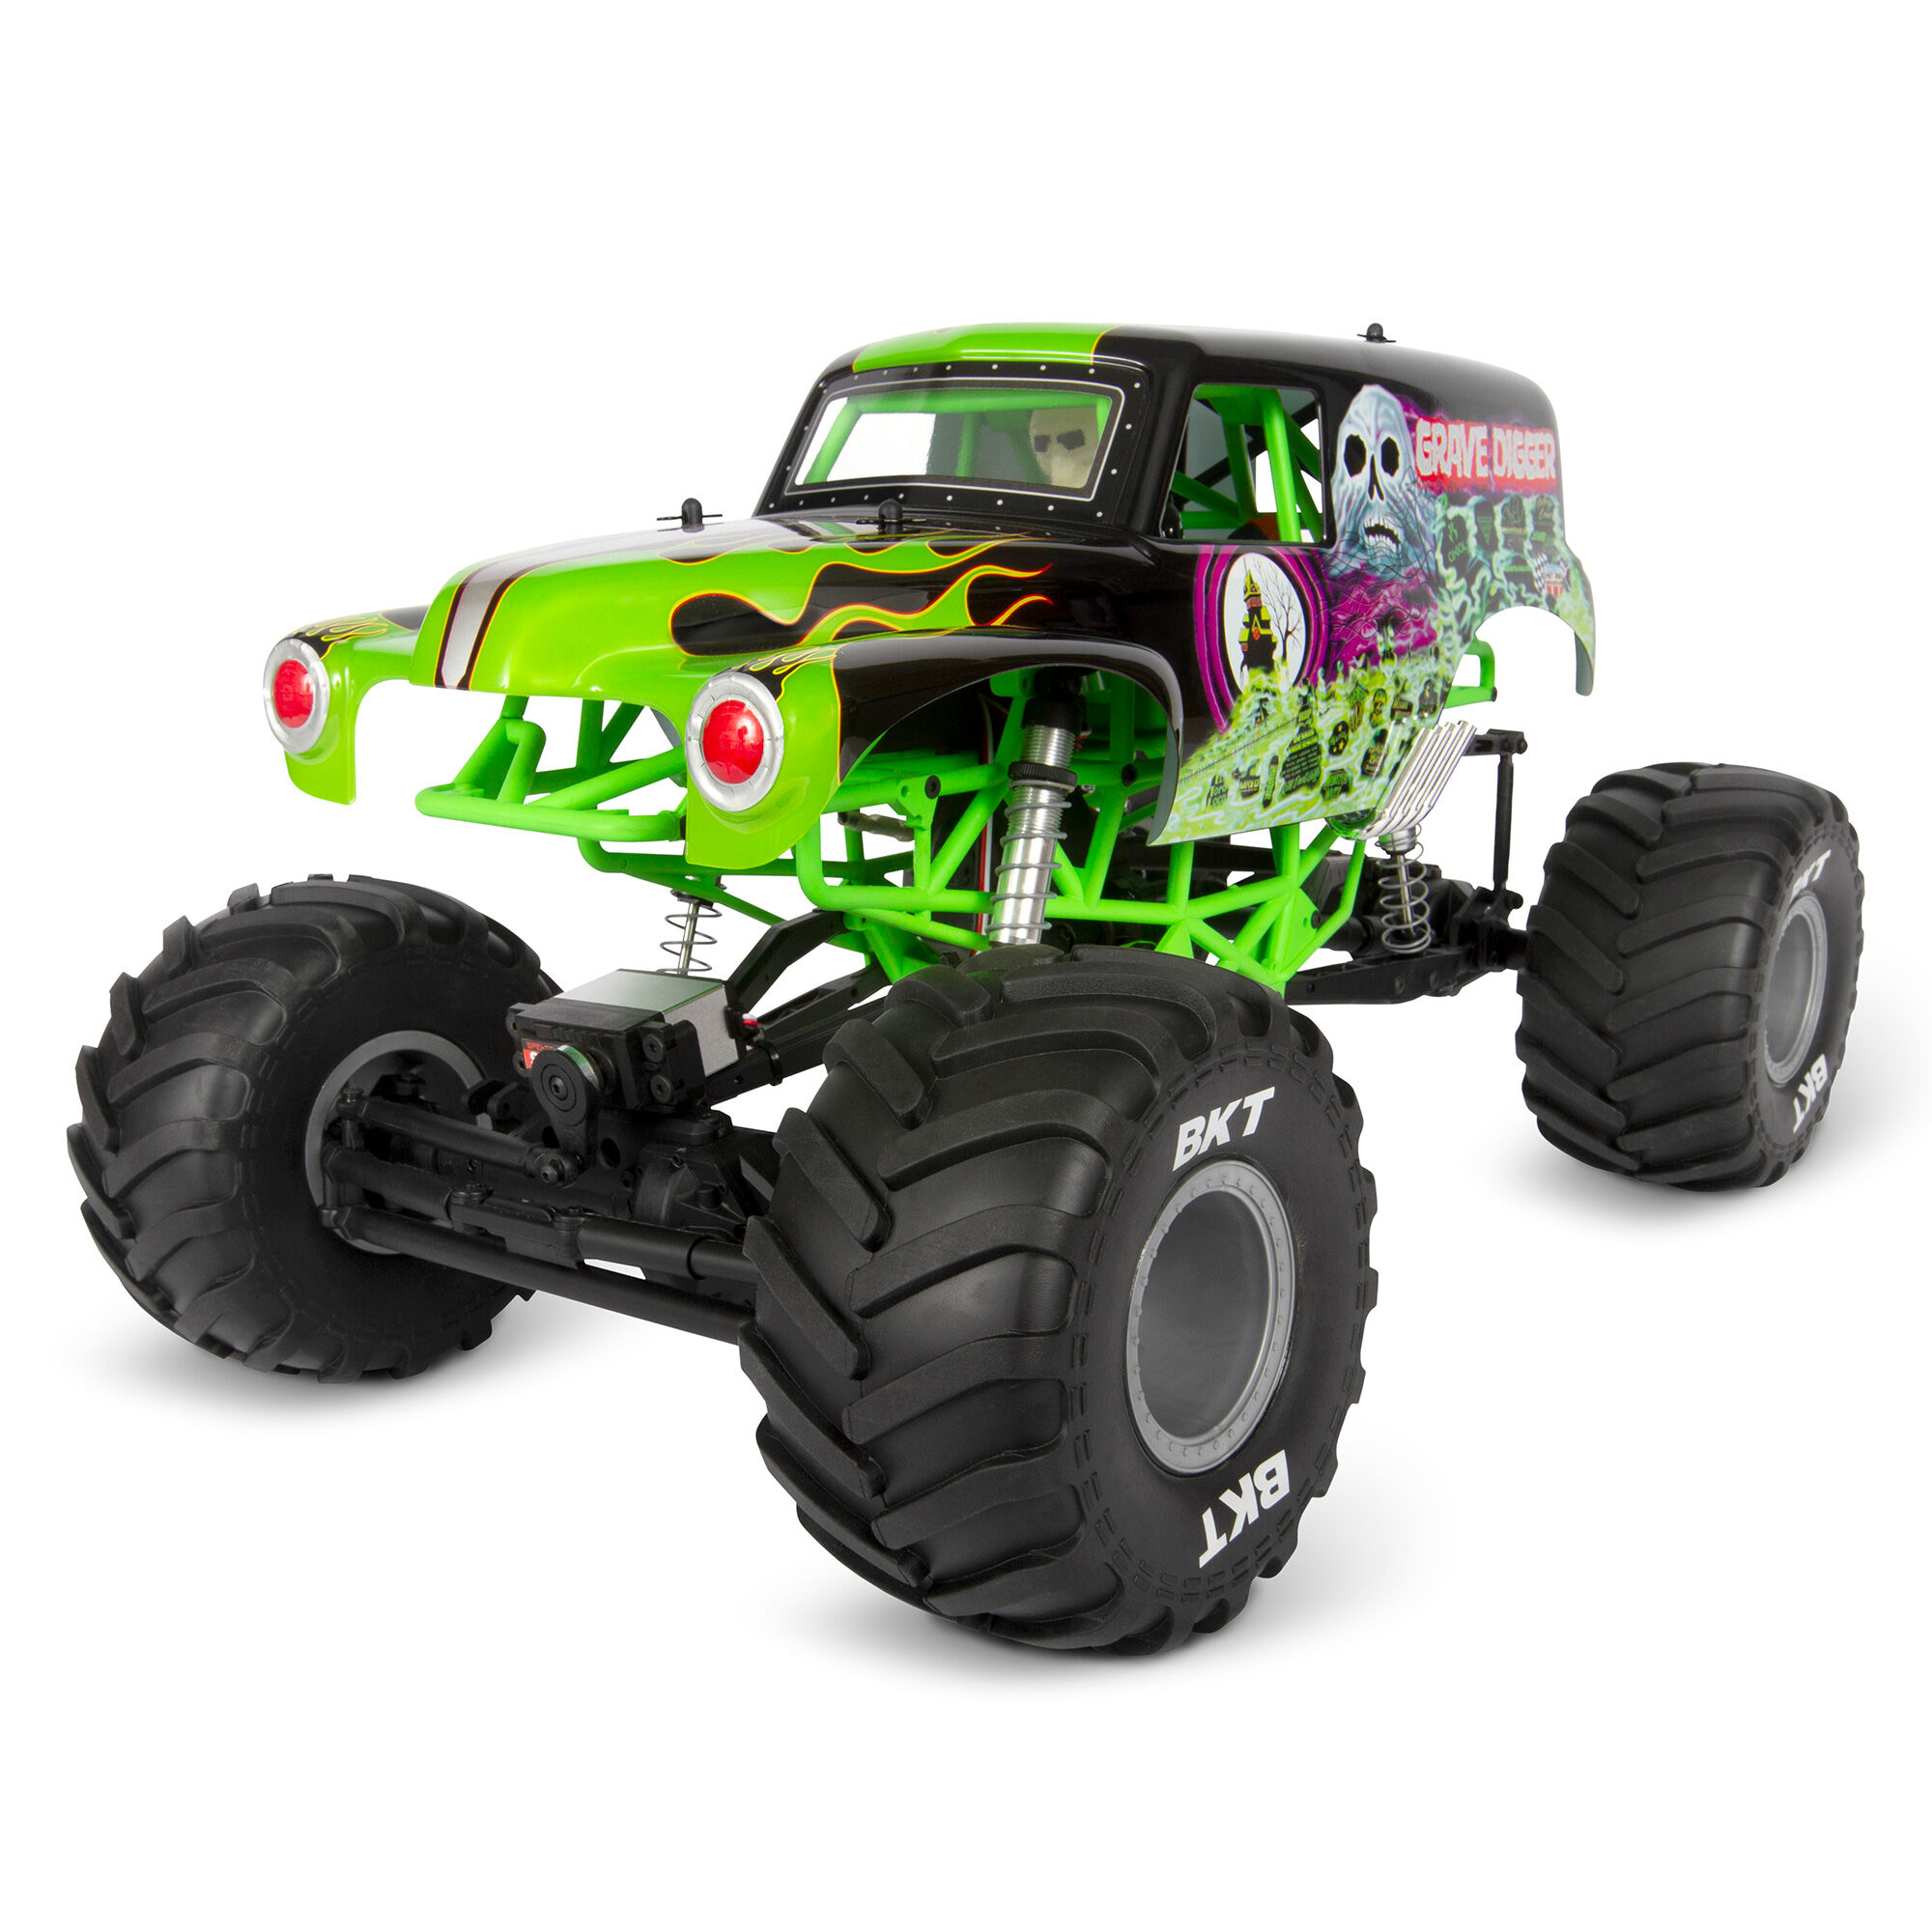 1/10 SMT10 Grave Digger 4WD Brushed Monster Truck RTR | Axial